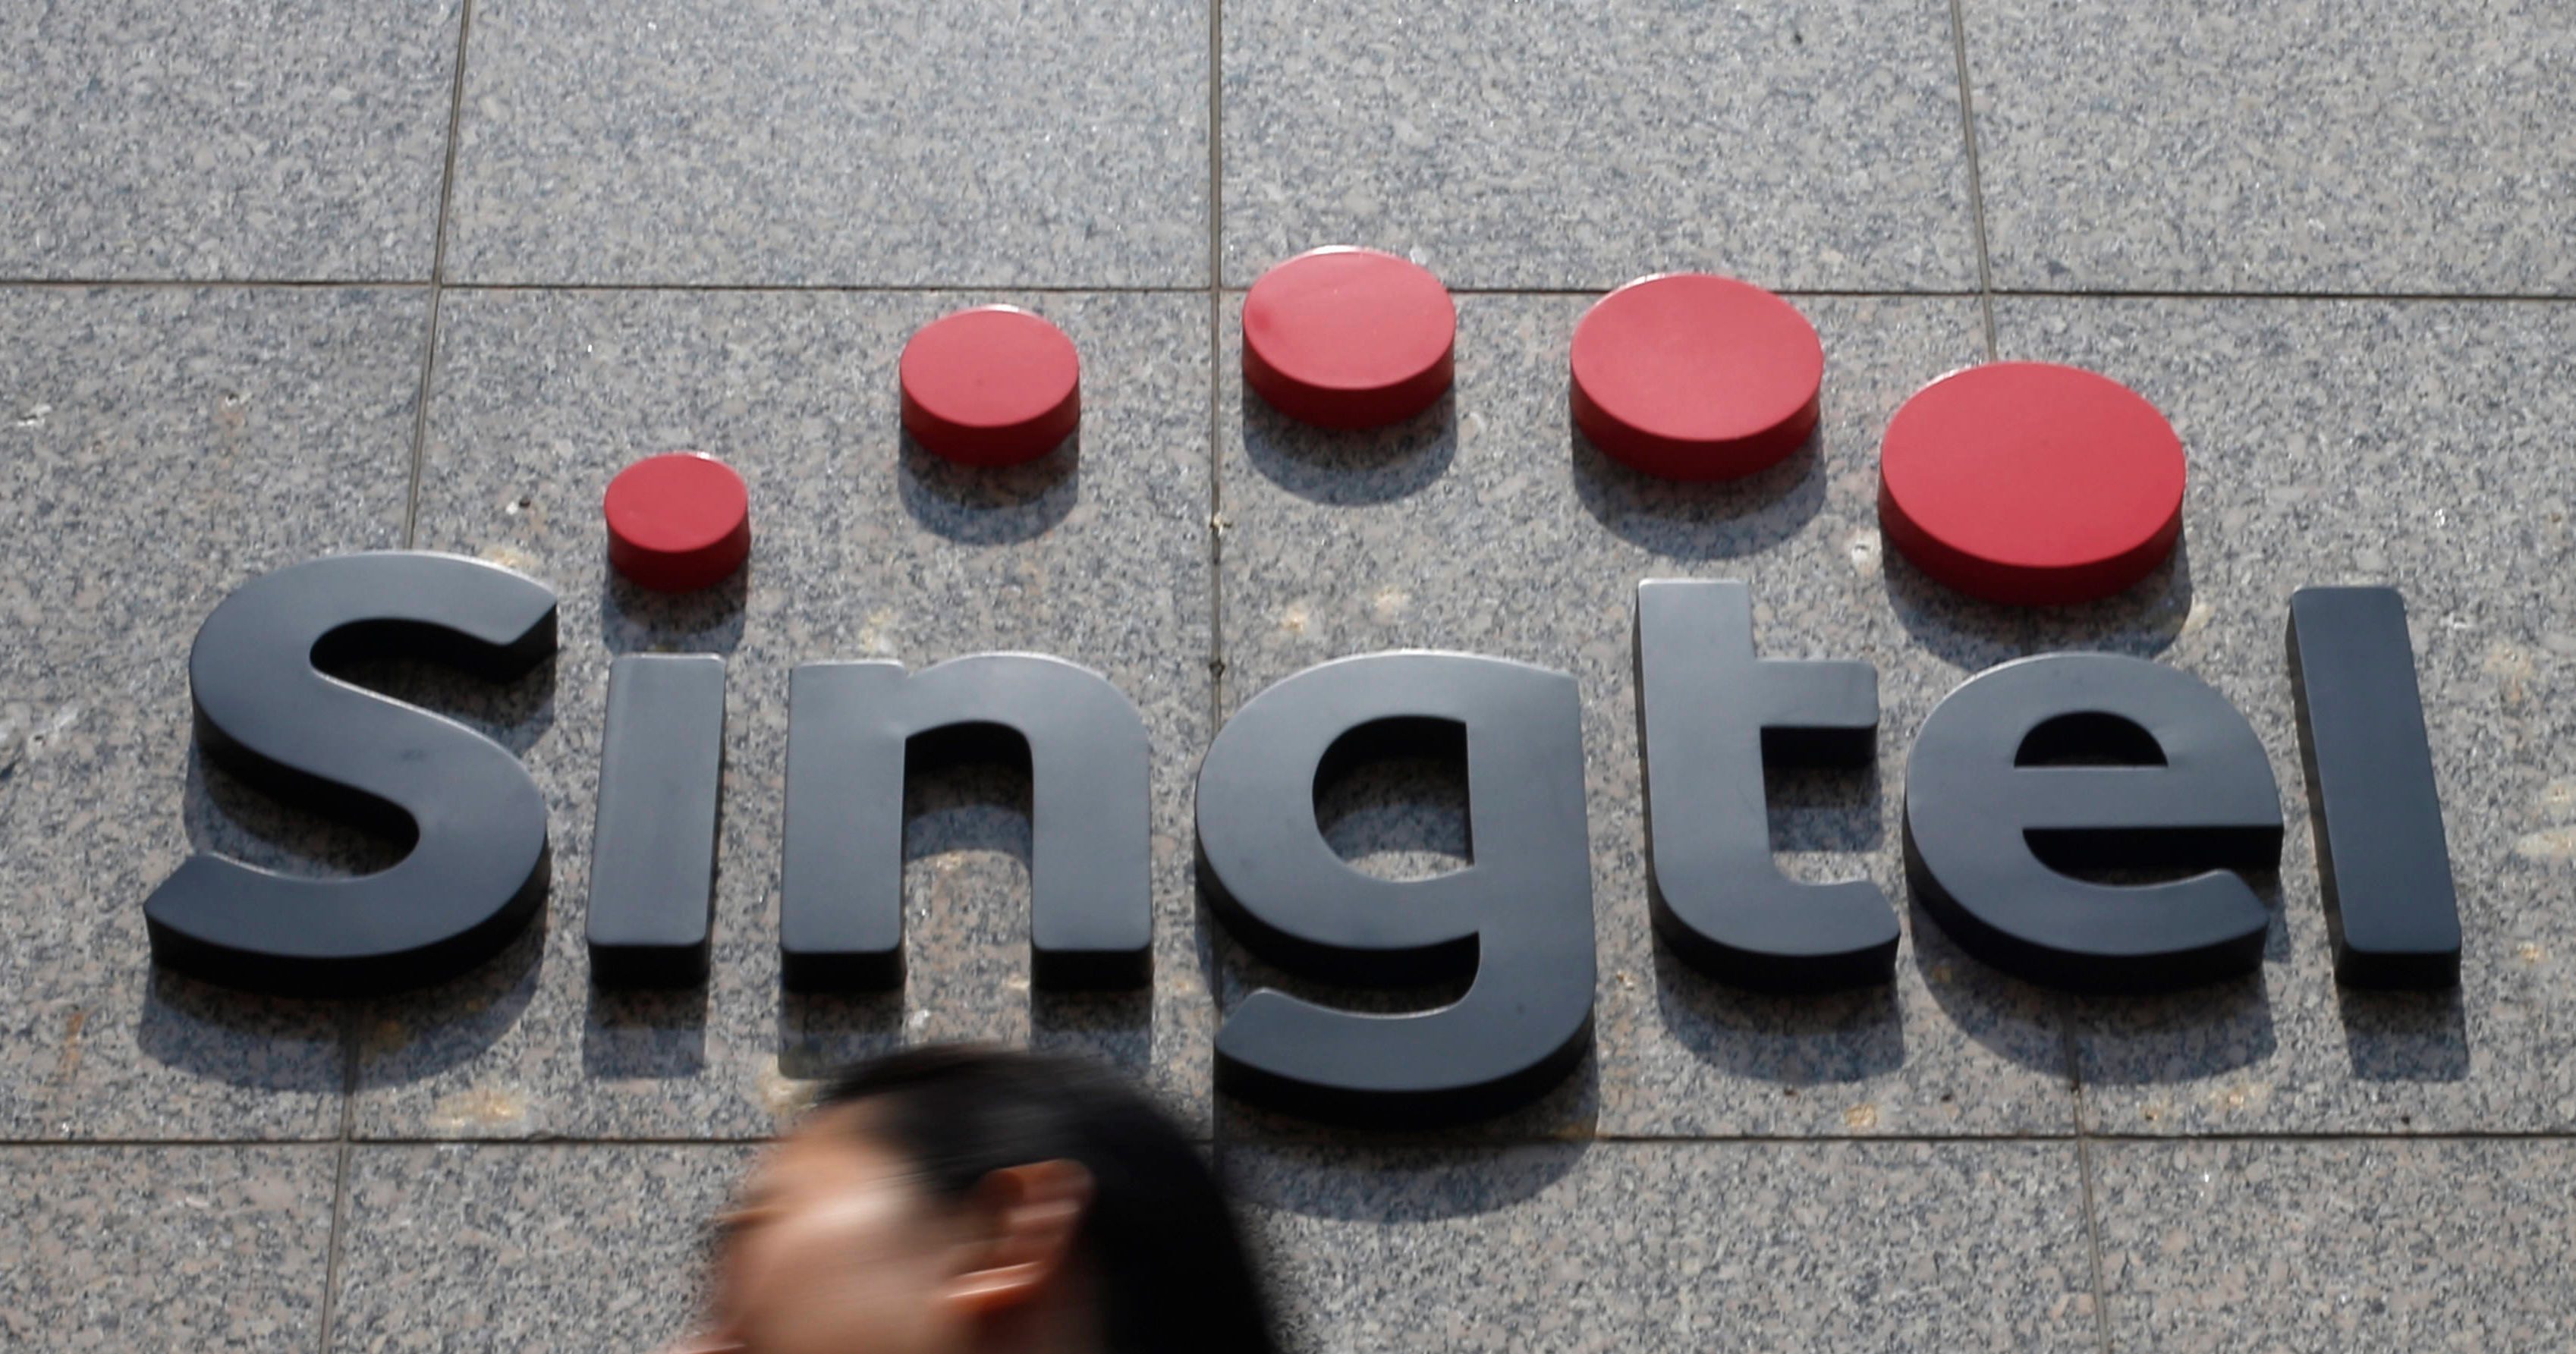 Singtel appoints new group CEO amid slump in telecom sector